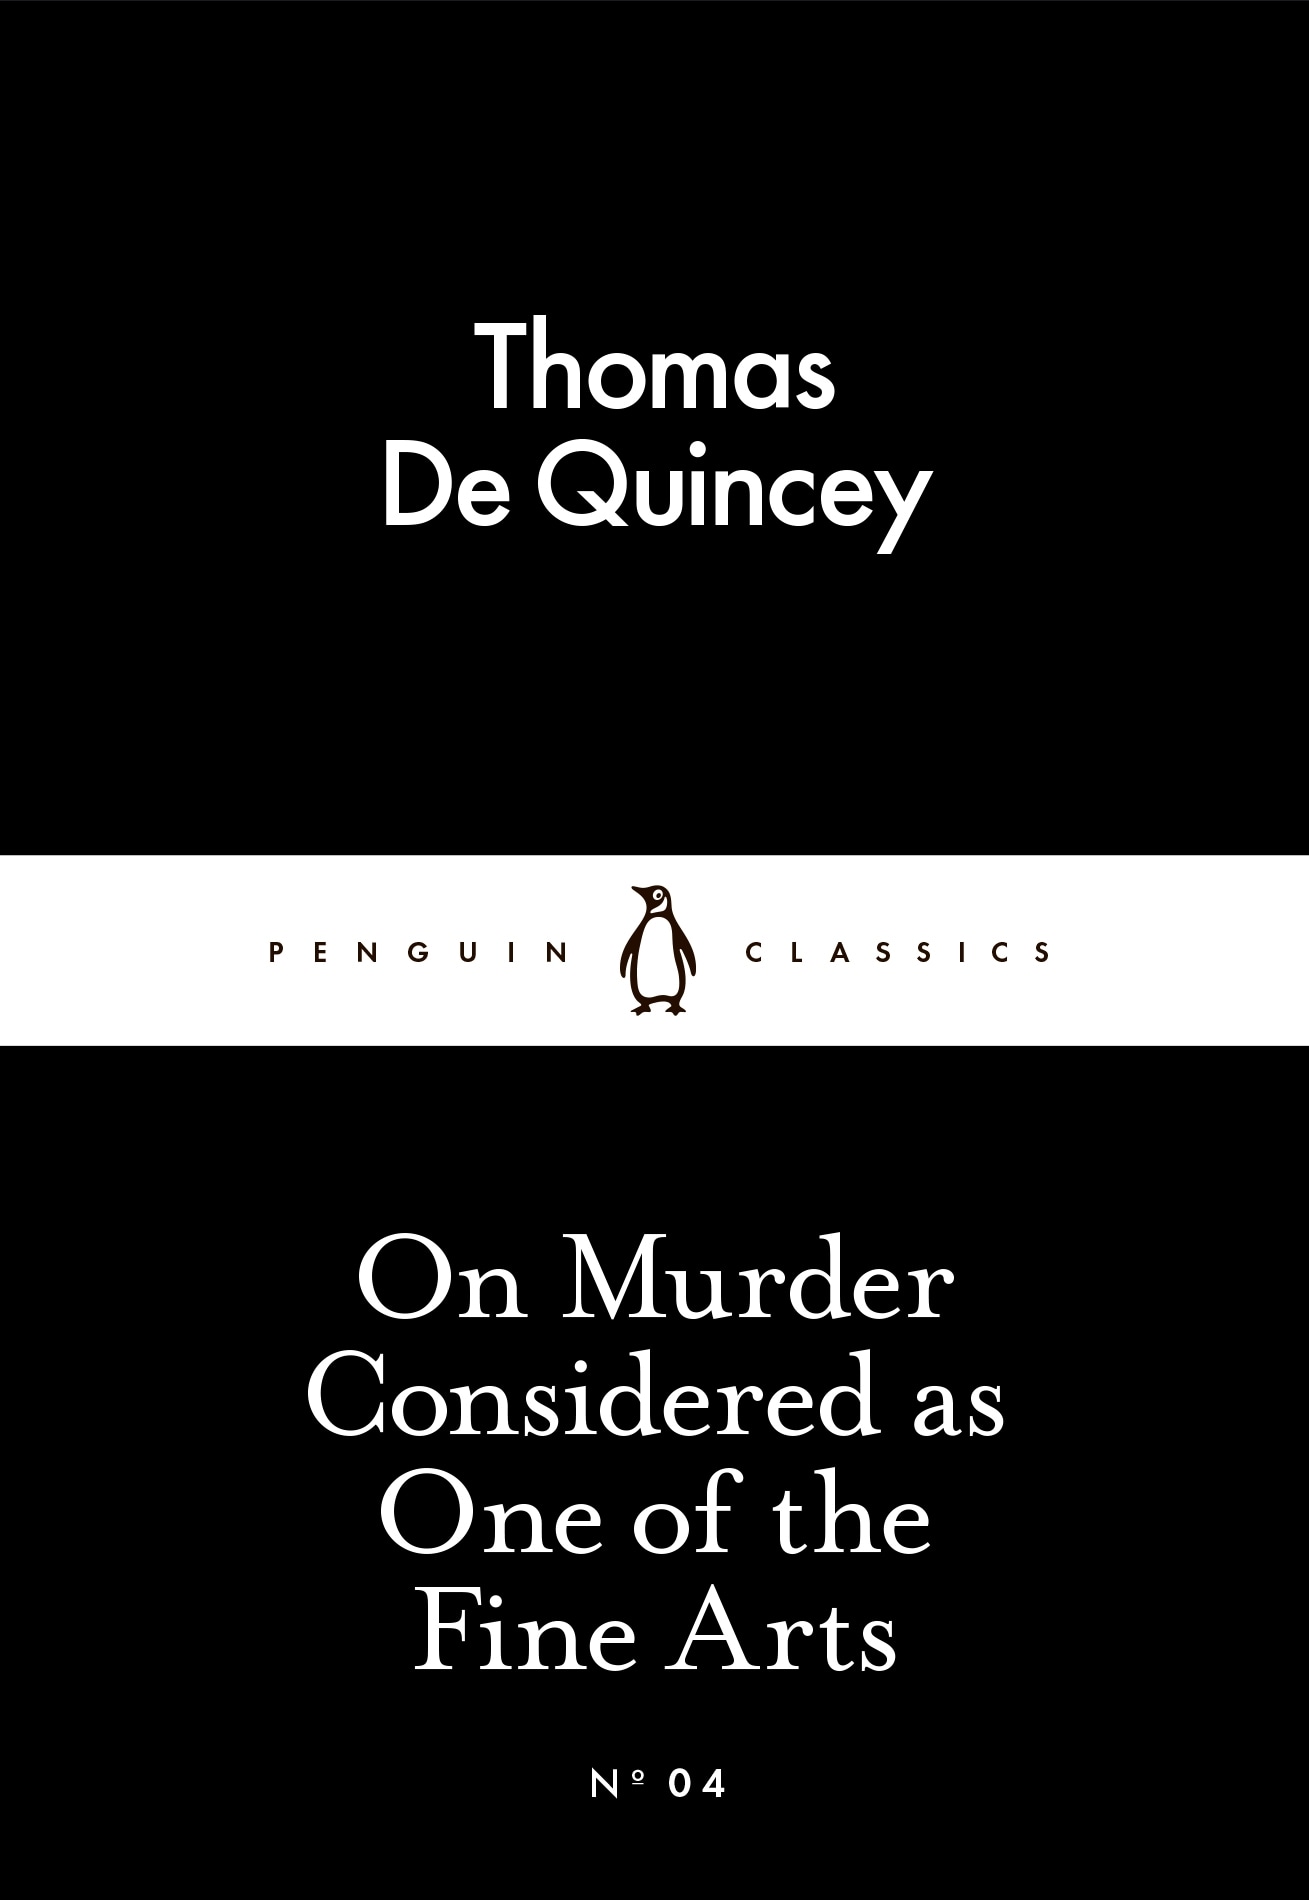 Book “On Murder Considered as One of the Fine Arts” by Thomas De Quincey — February 26, 2015